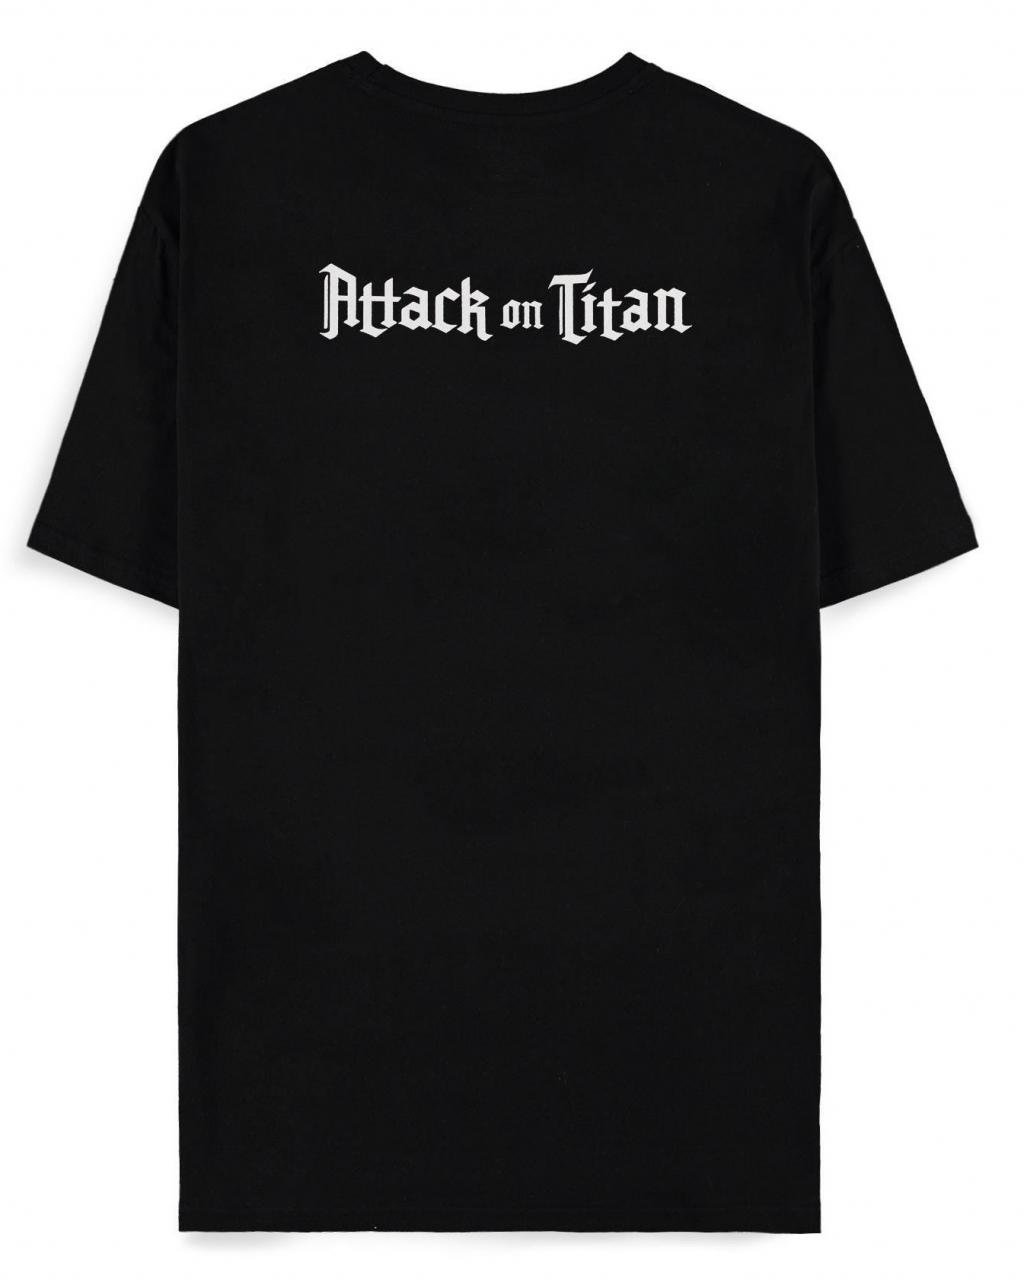 ATTACK ON TITAN - Zeke Yeager - Men's T-Shirt (S)